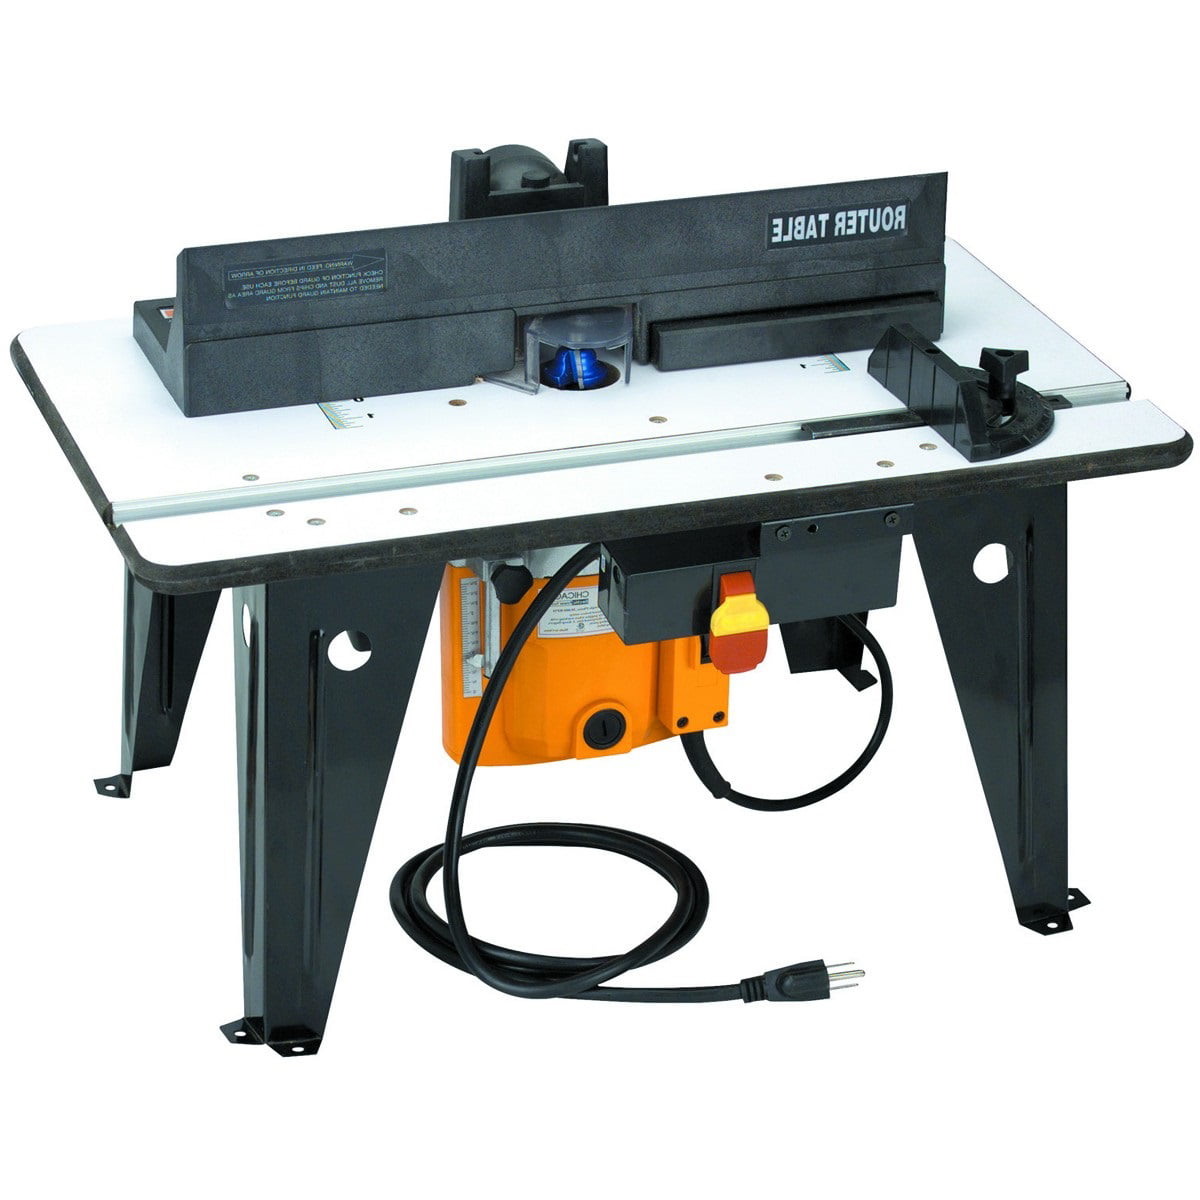 NEW Bench top Router Table with 1-3//4 HP Router 11 amps Free Shipping